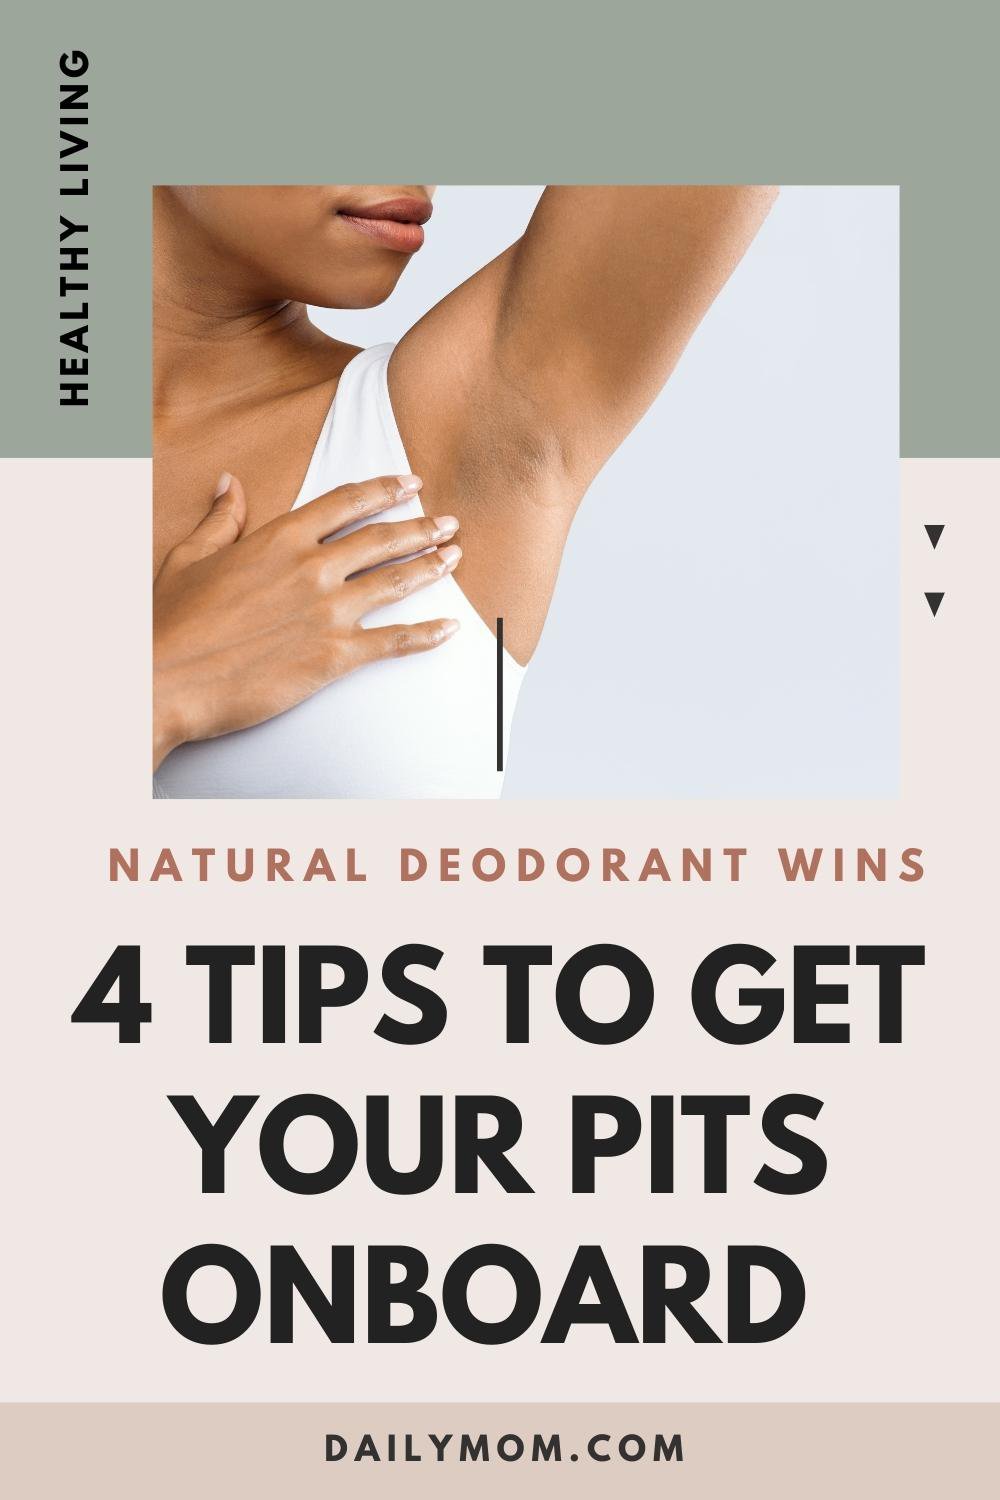 Why Natural Deodorant Wins And 4 Tips To Get Your Pits Onboard